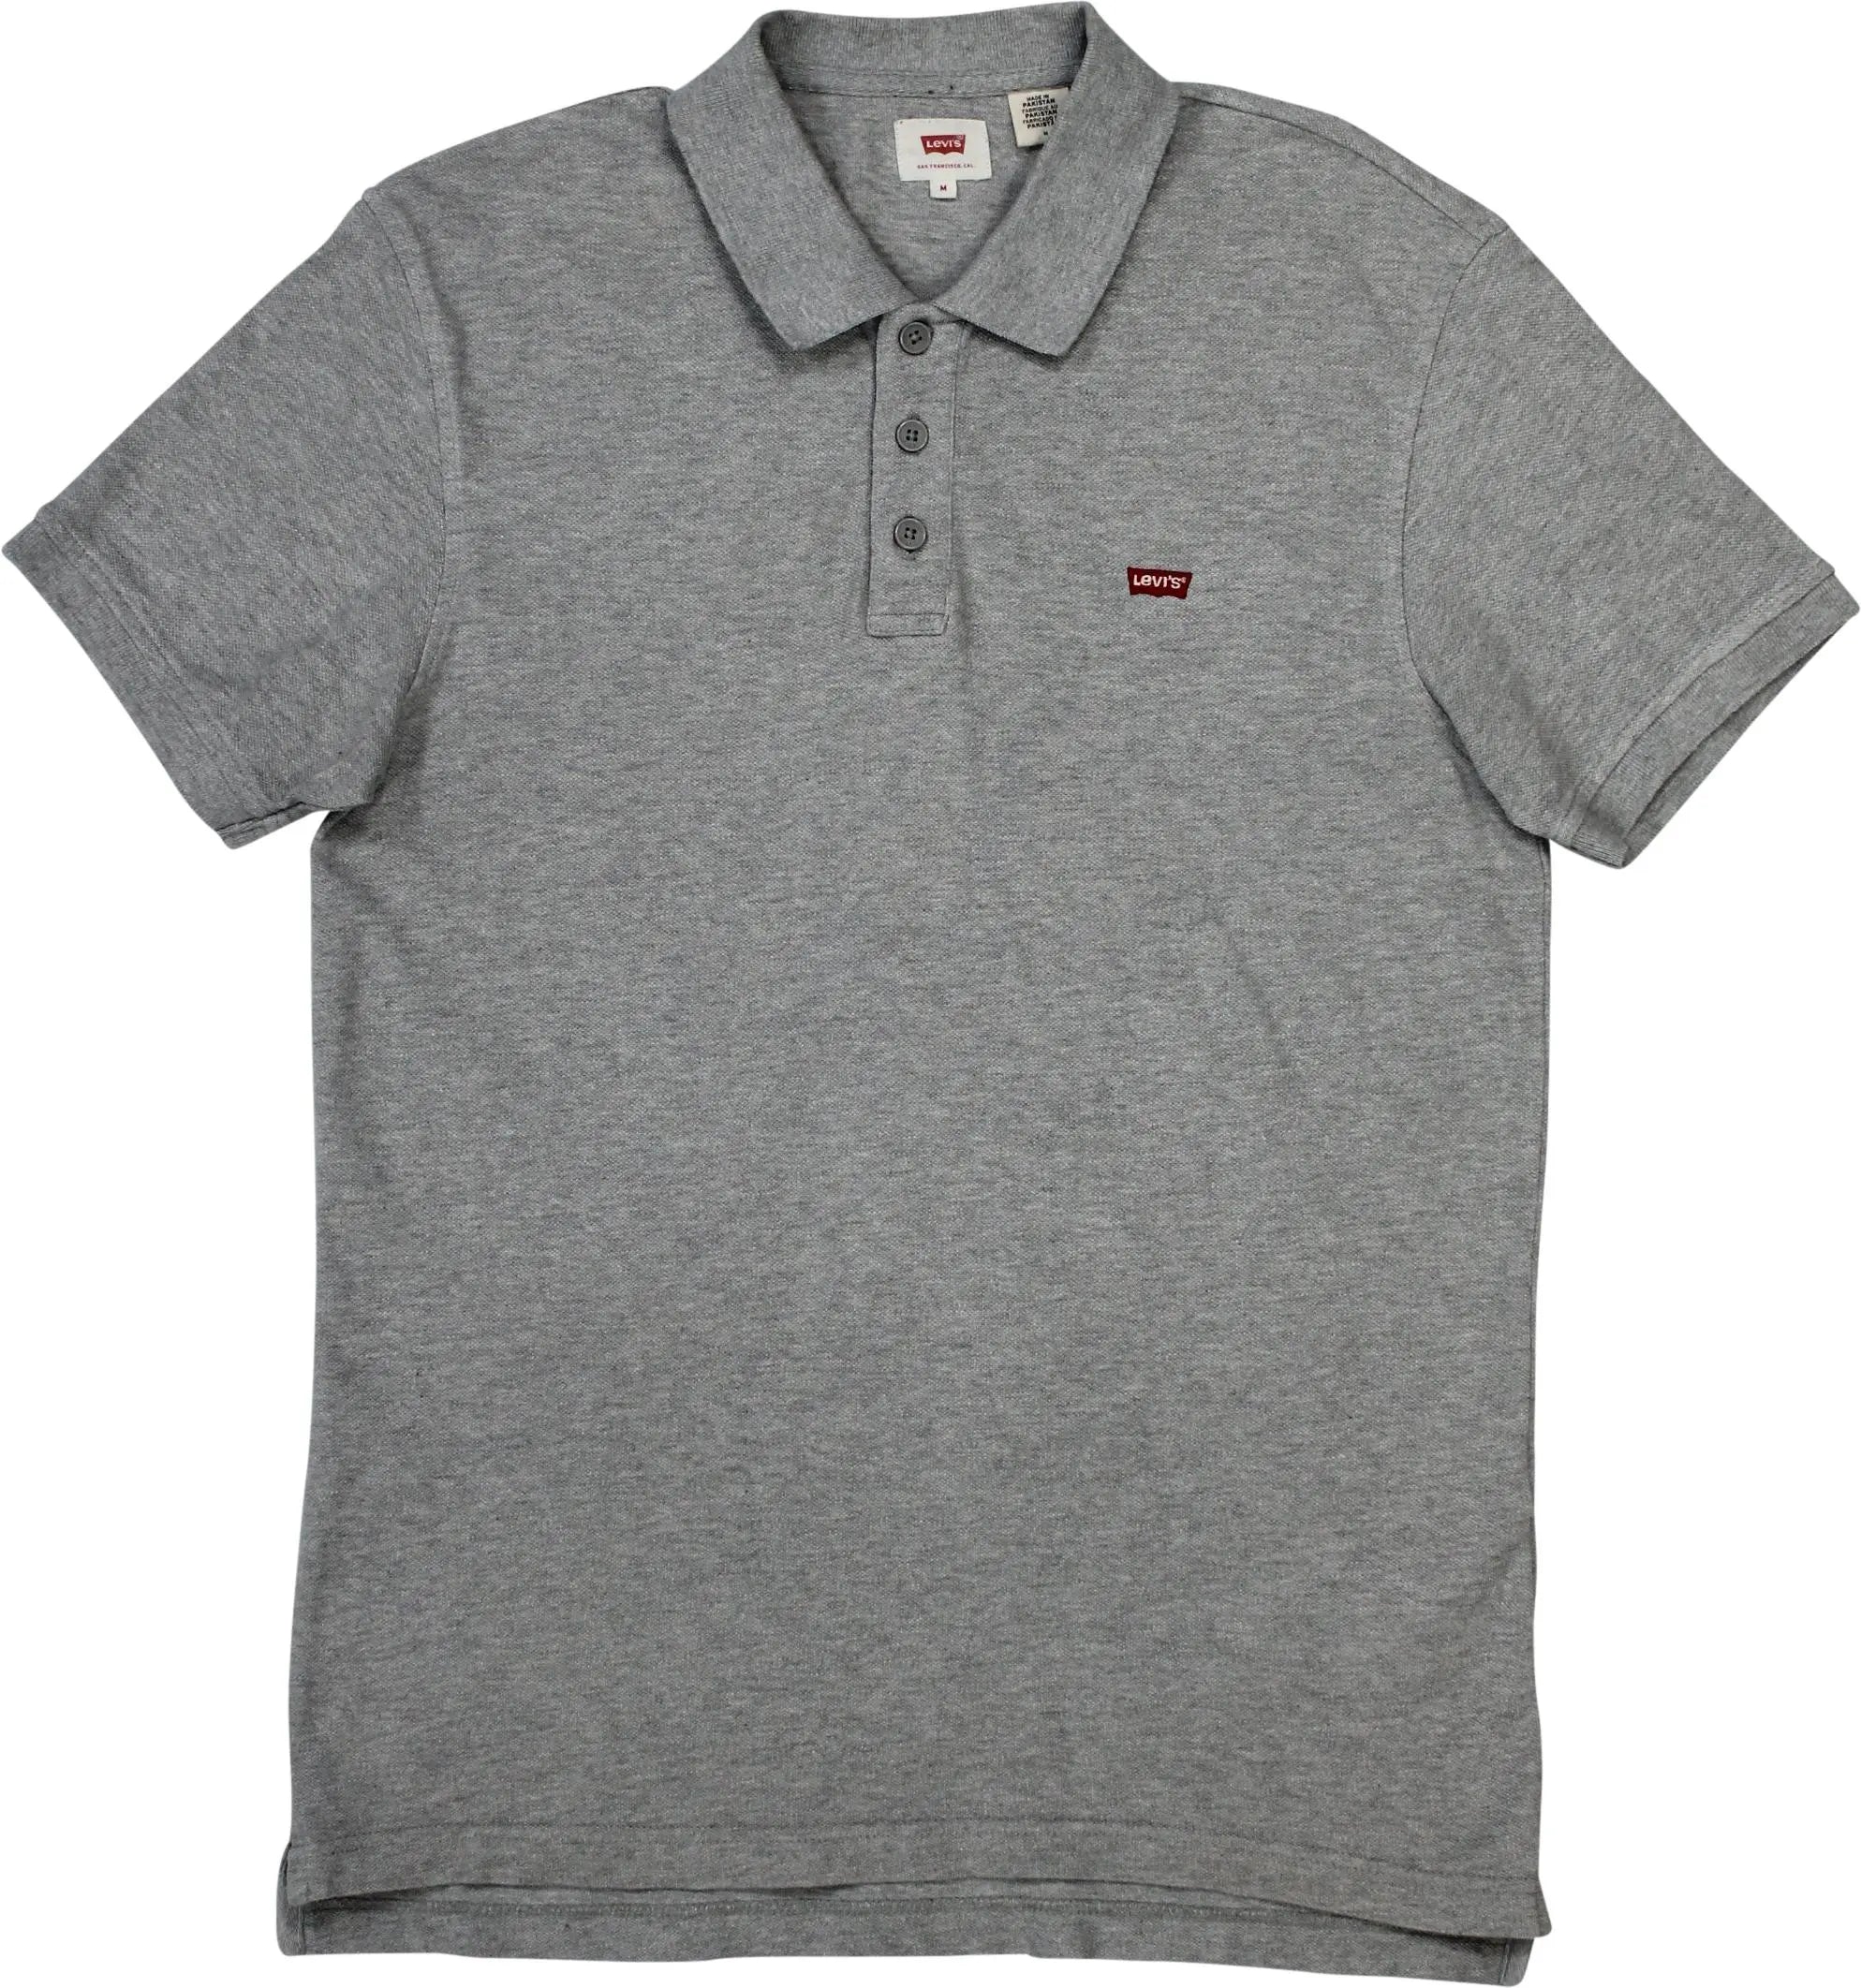 Levi's - Grey Polo Shirt by Levi's- ThriftTale.com - Vintage and second handclothing